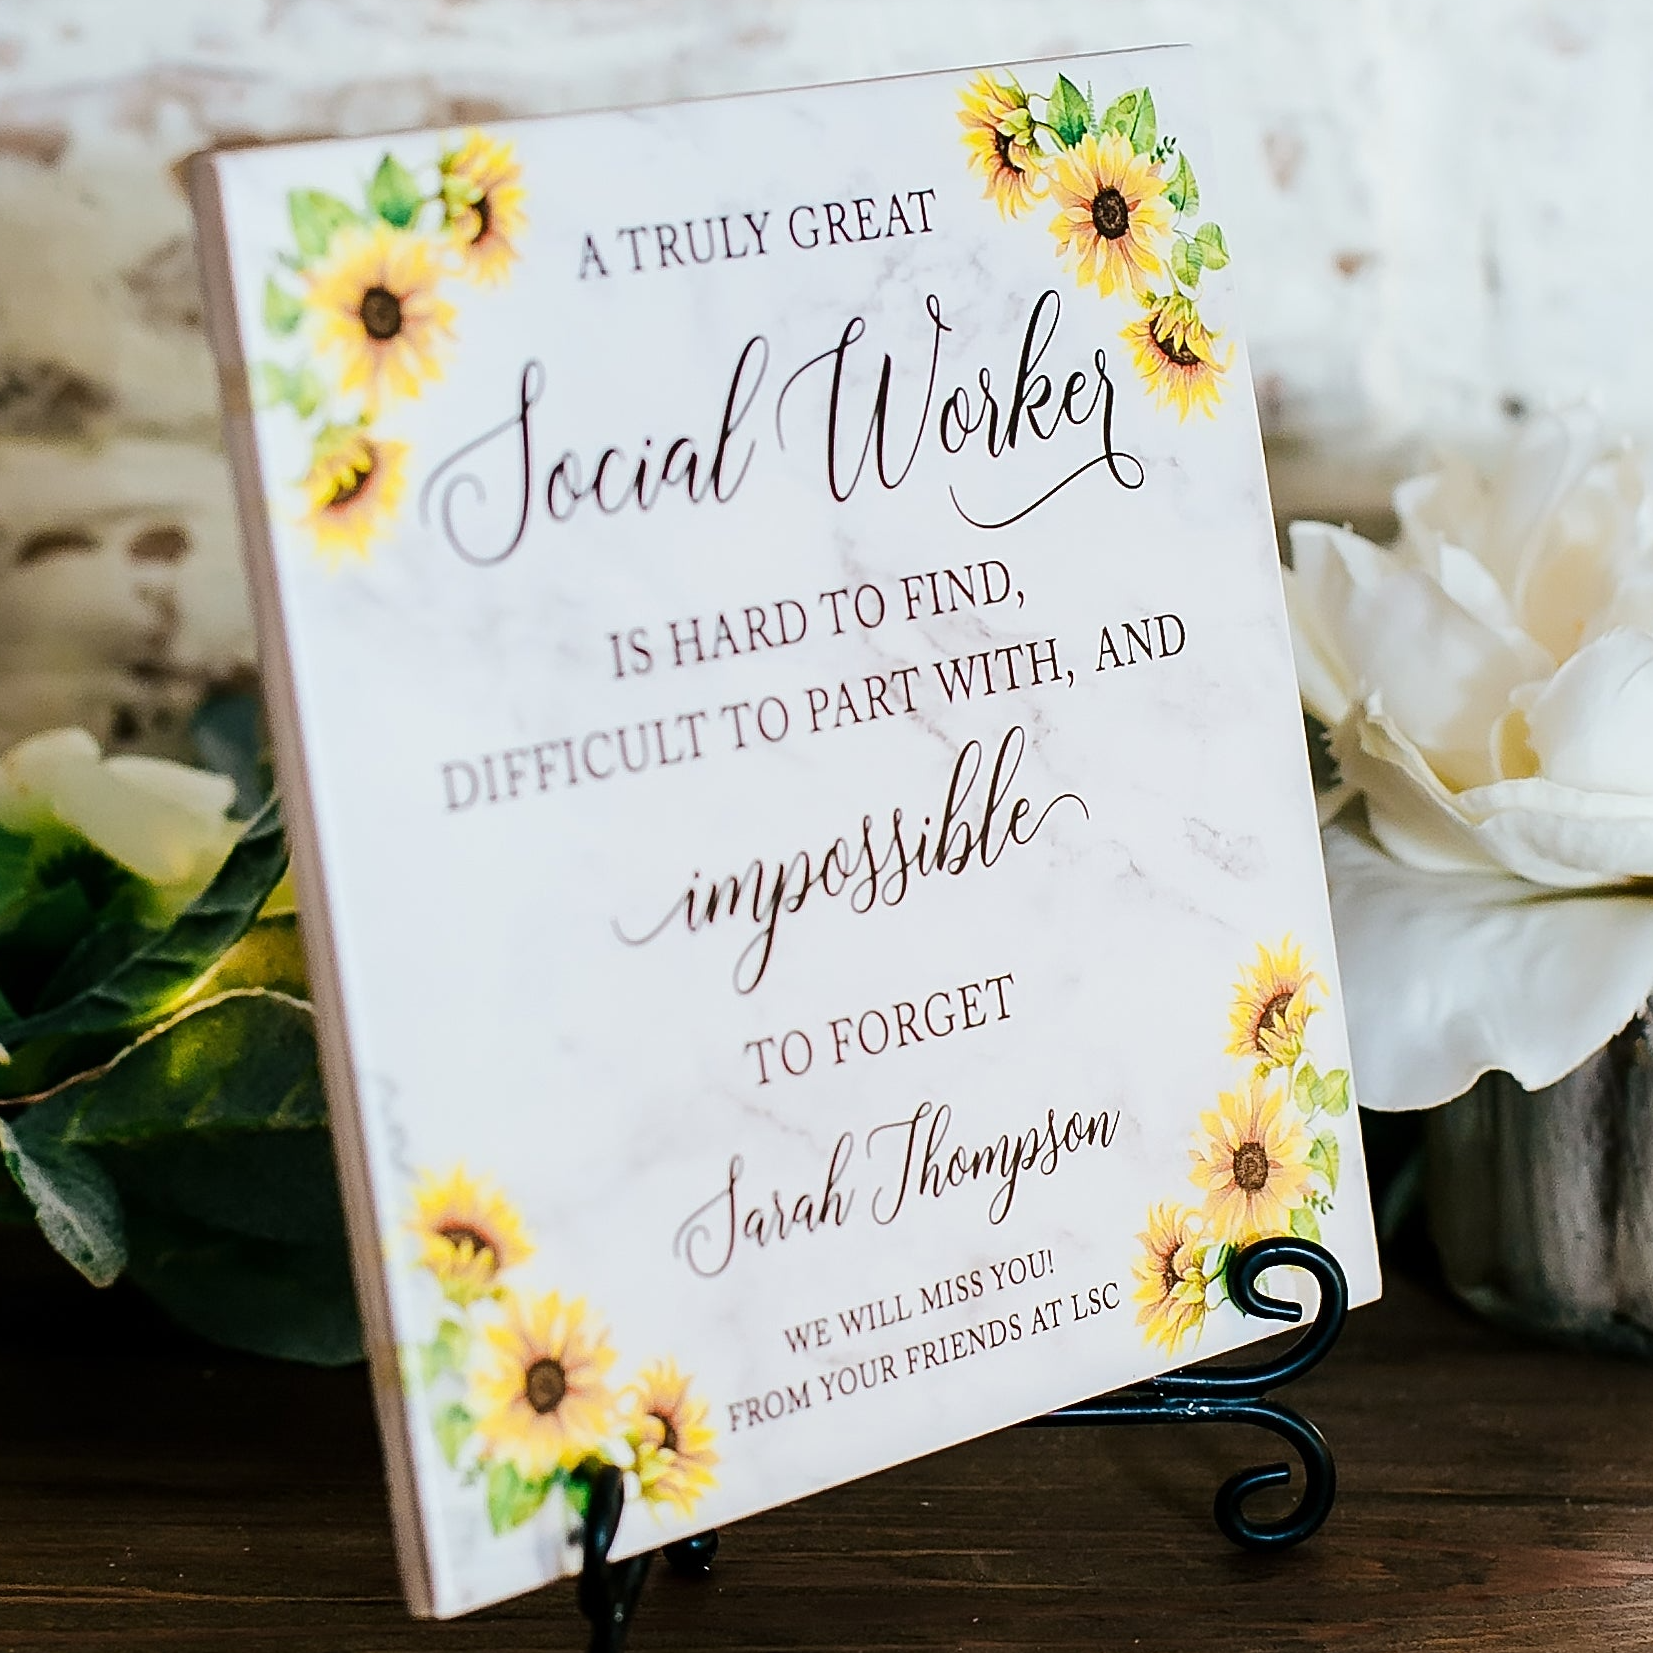 truly great social worker sunflowers retirement or going away sign